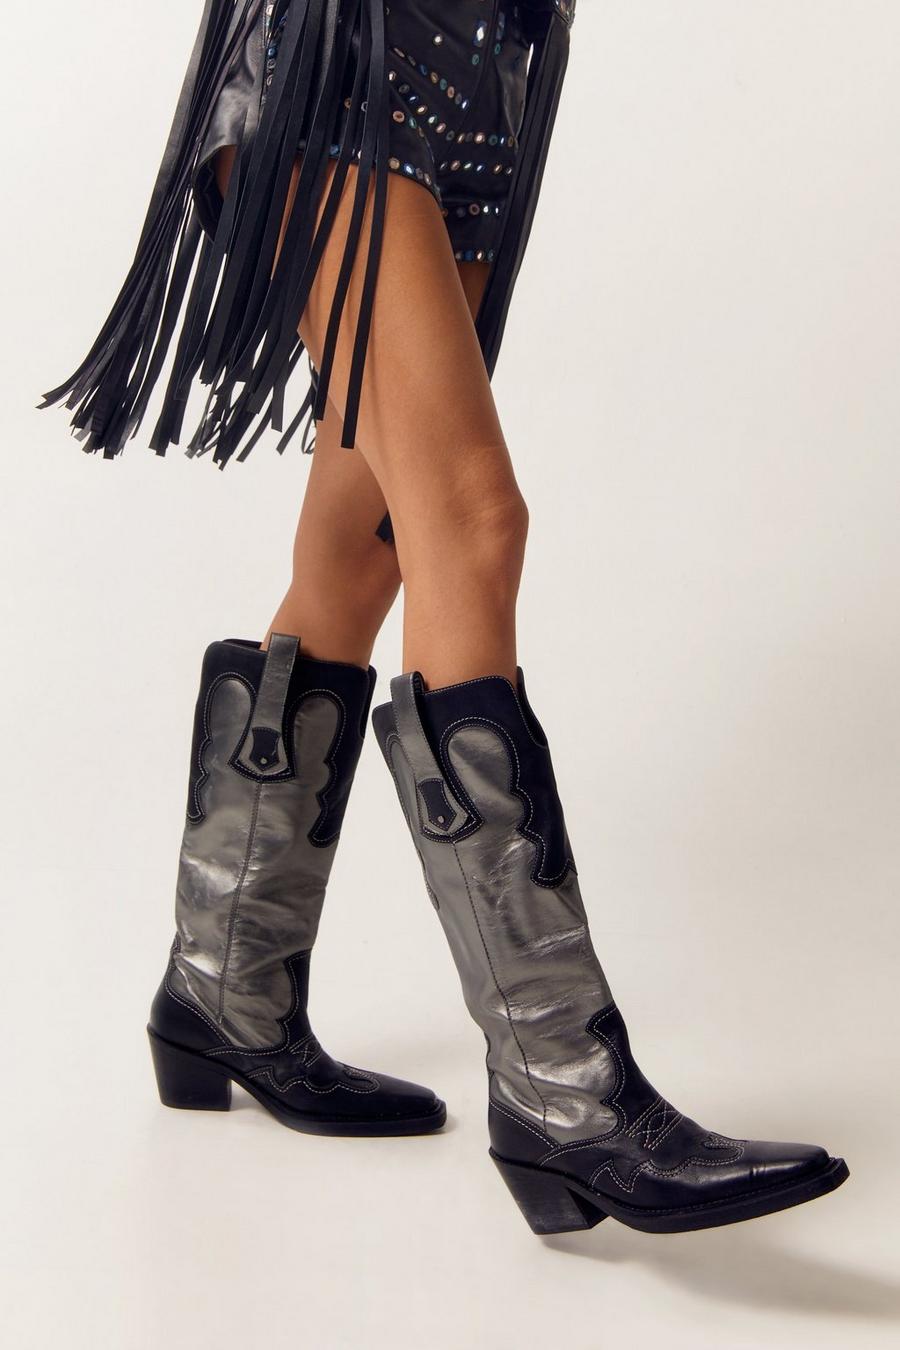 Women's Cowboy Boots | Country & Western Boots | Nasty Gal